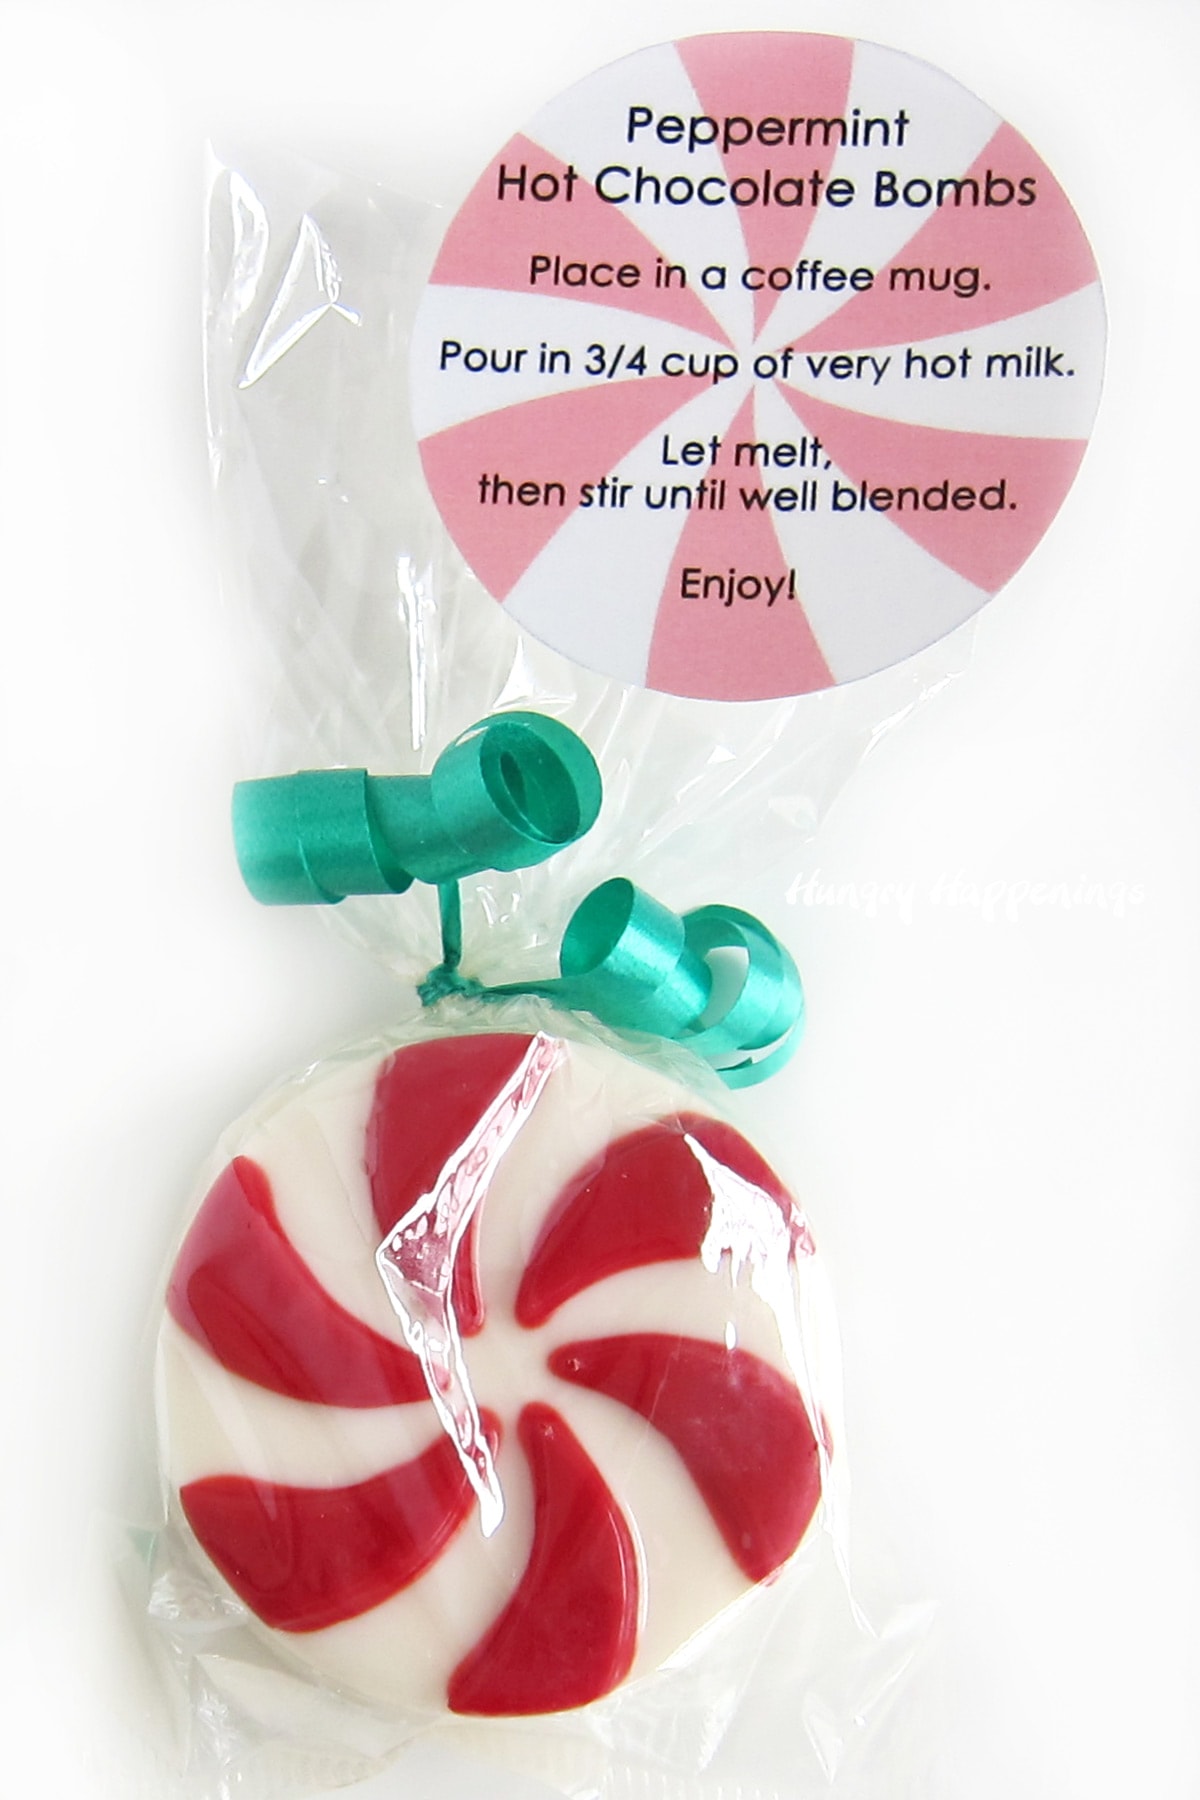 Peppermint hot chocolate bombs packaged in clear cellophane bags with a printable instructions tag.